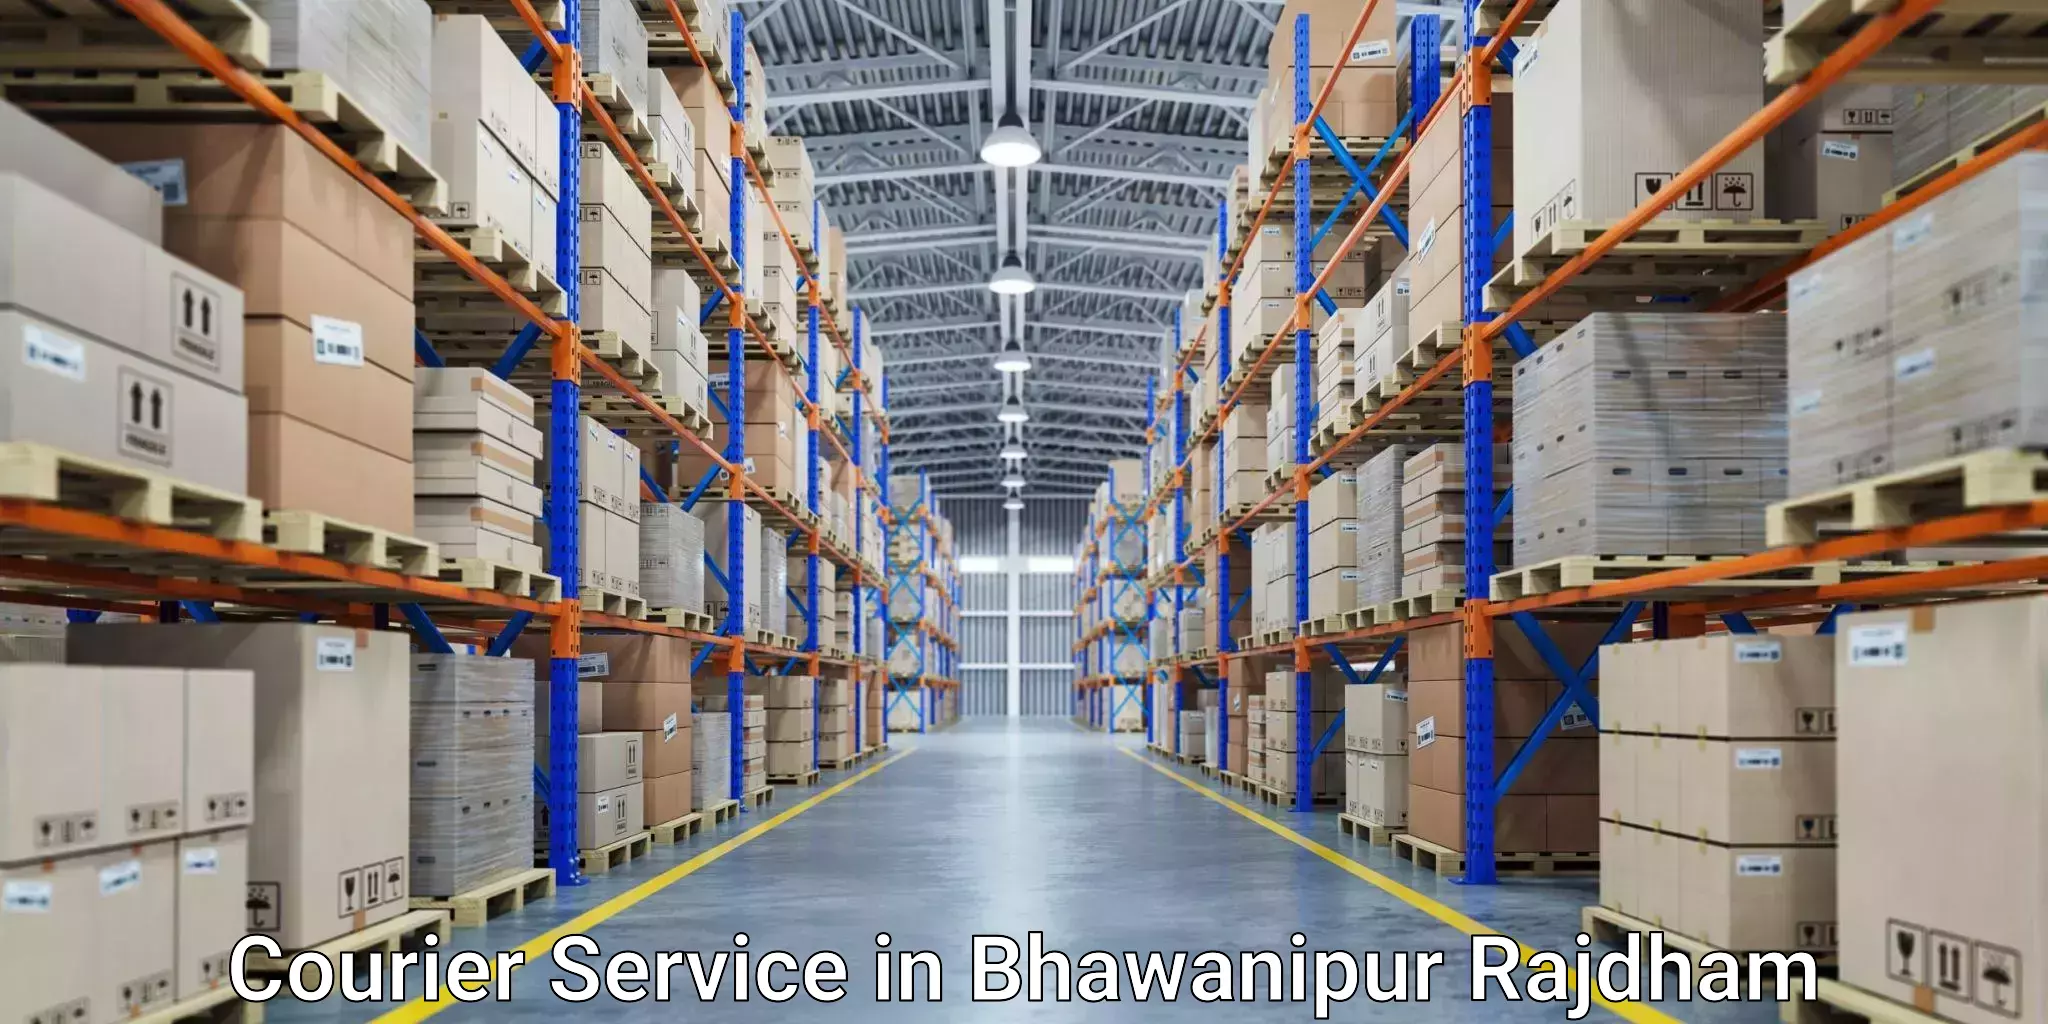 Express package services in Bhawanipur Rajdham